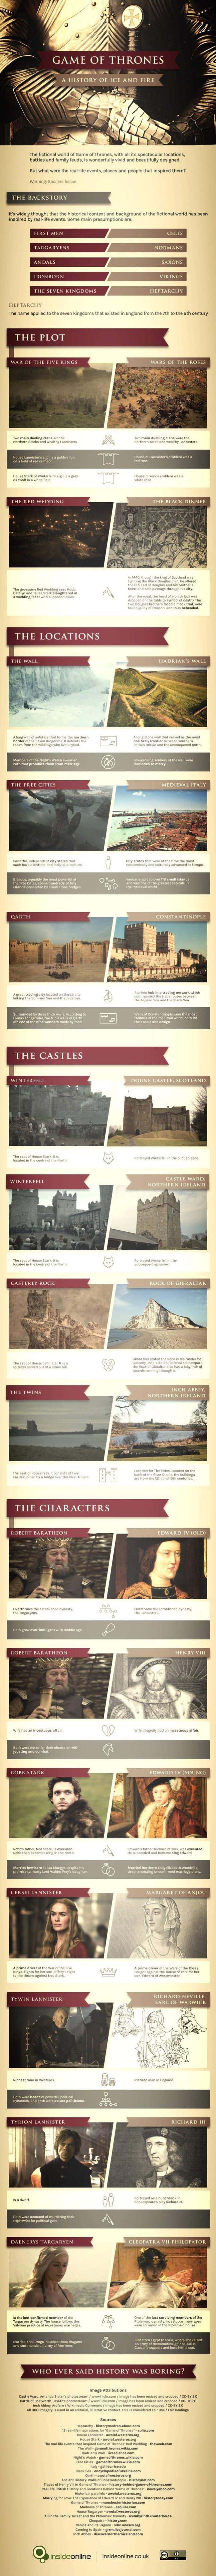 history of game of thrones